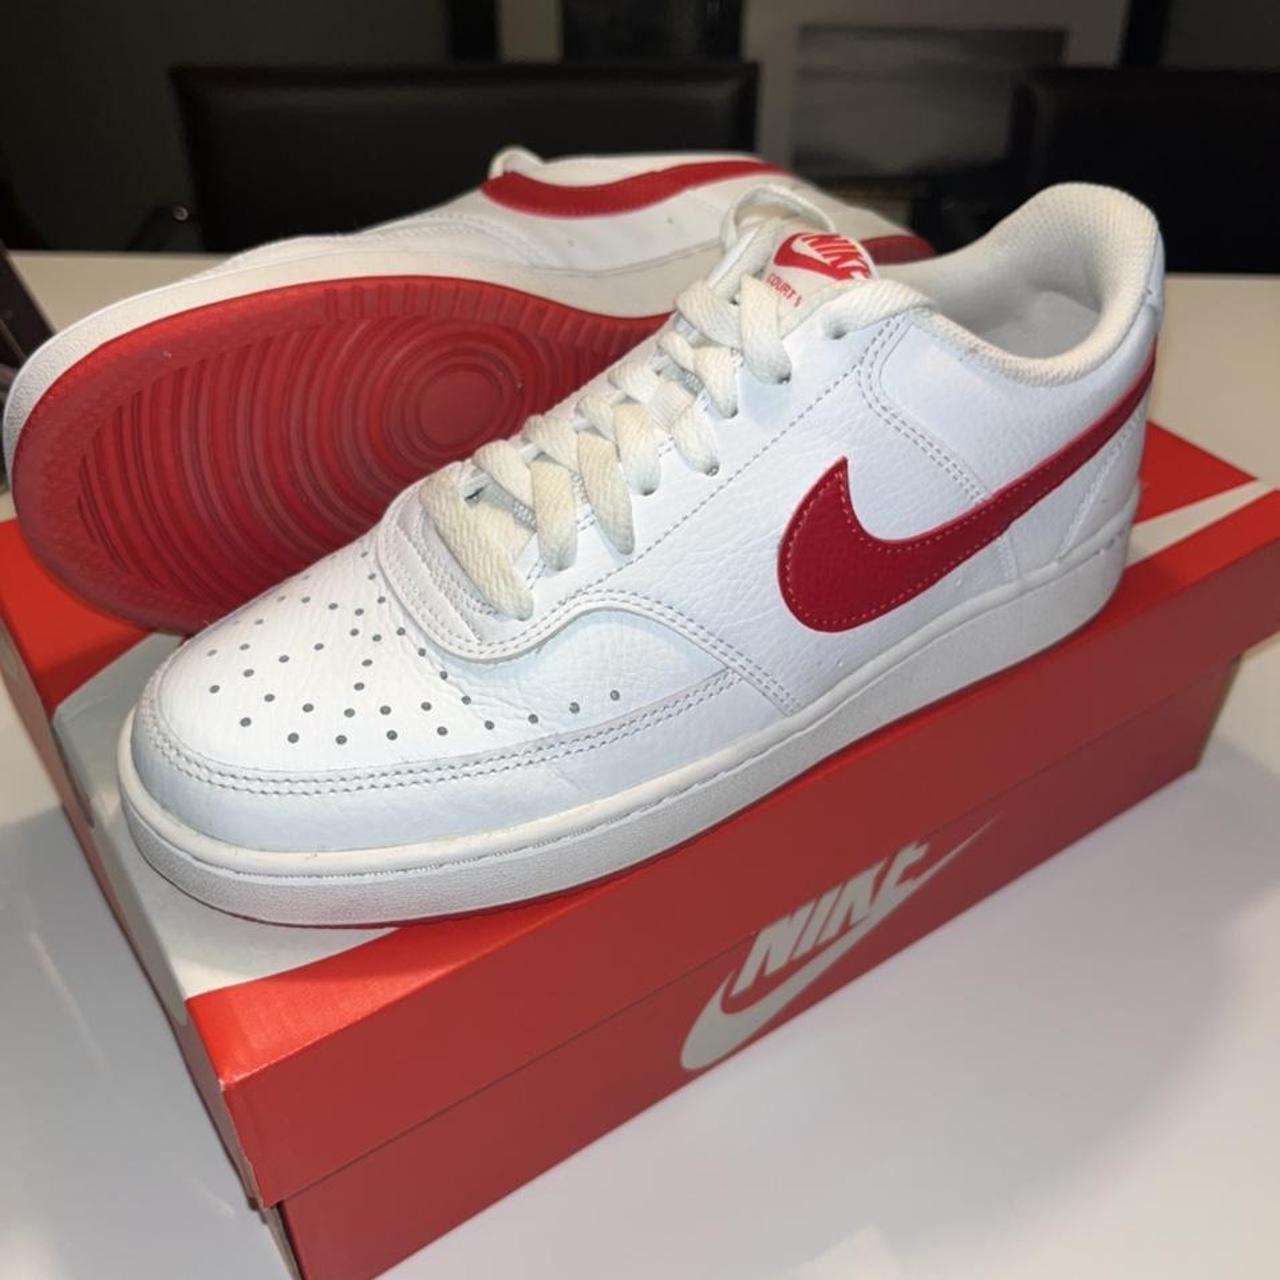 Nike Women's White and Red Trainers | Depop